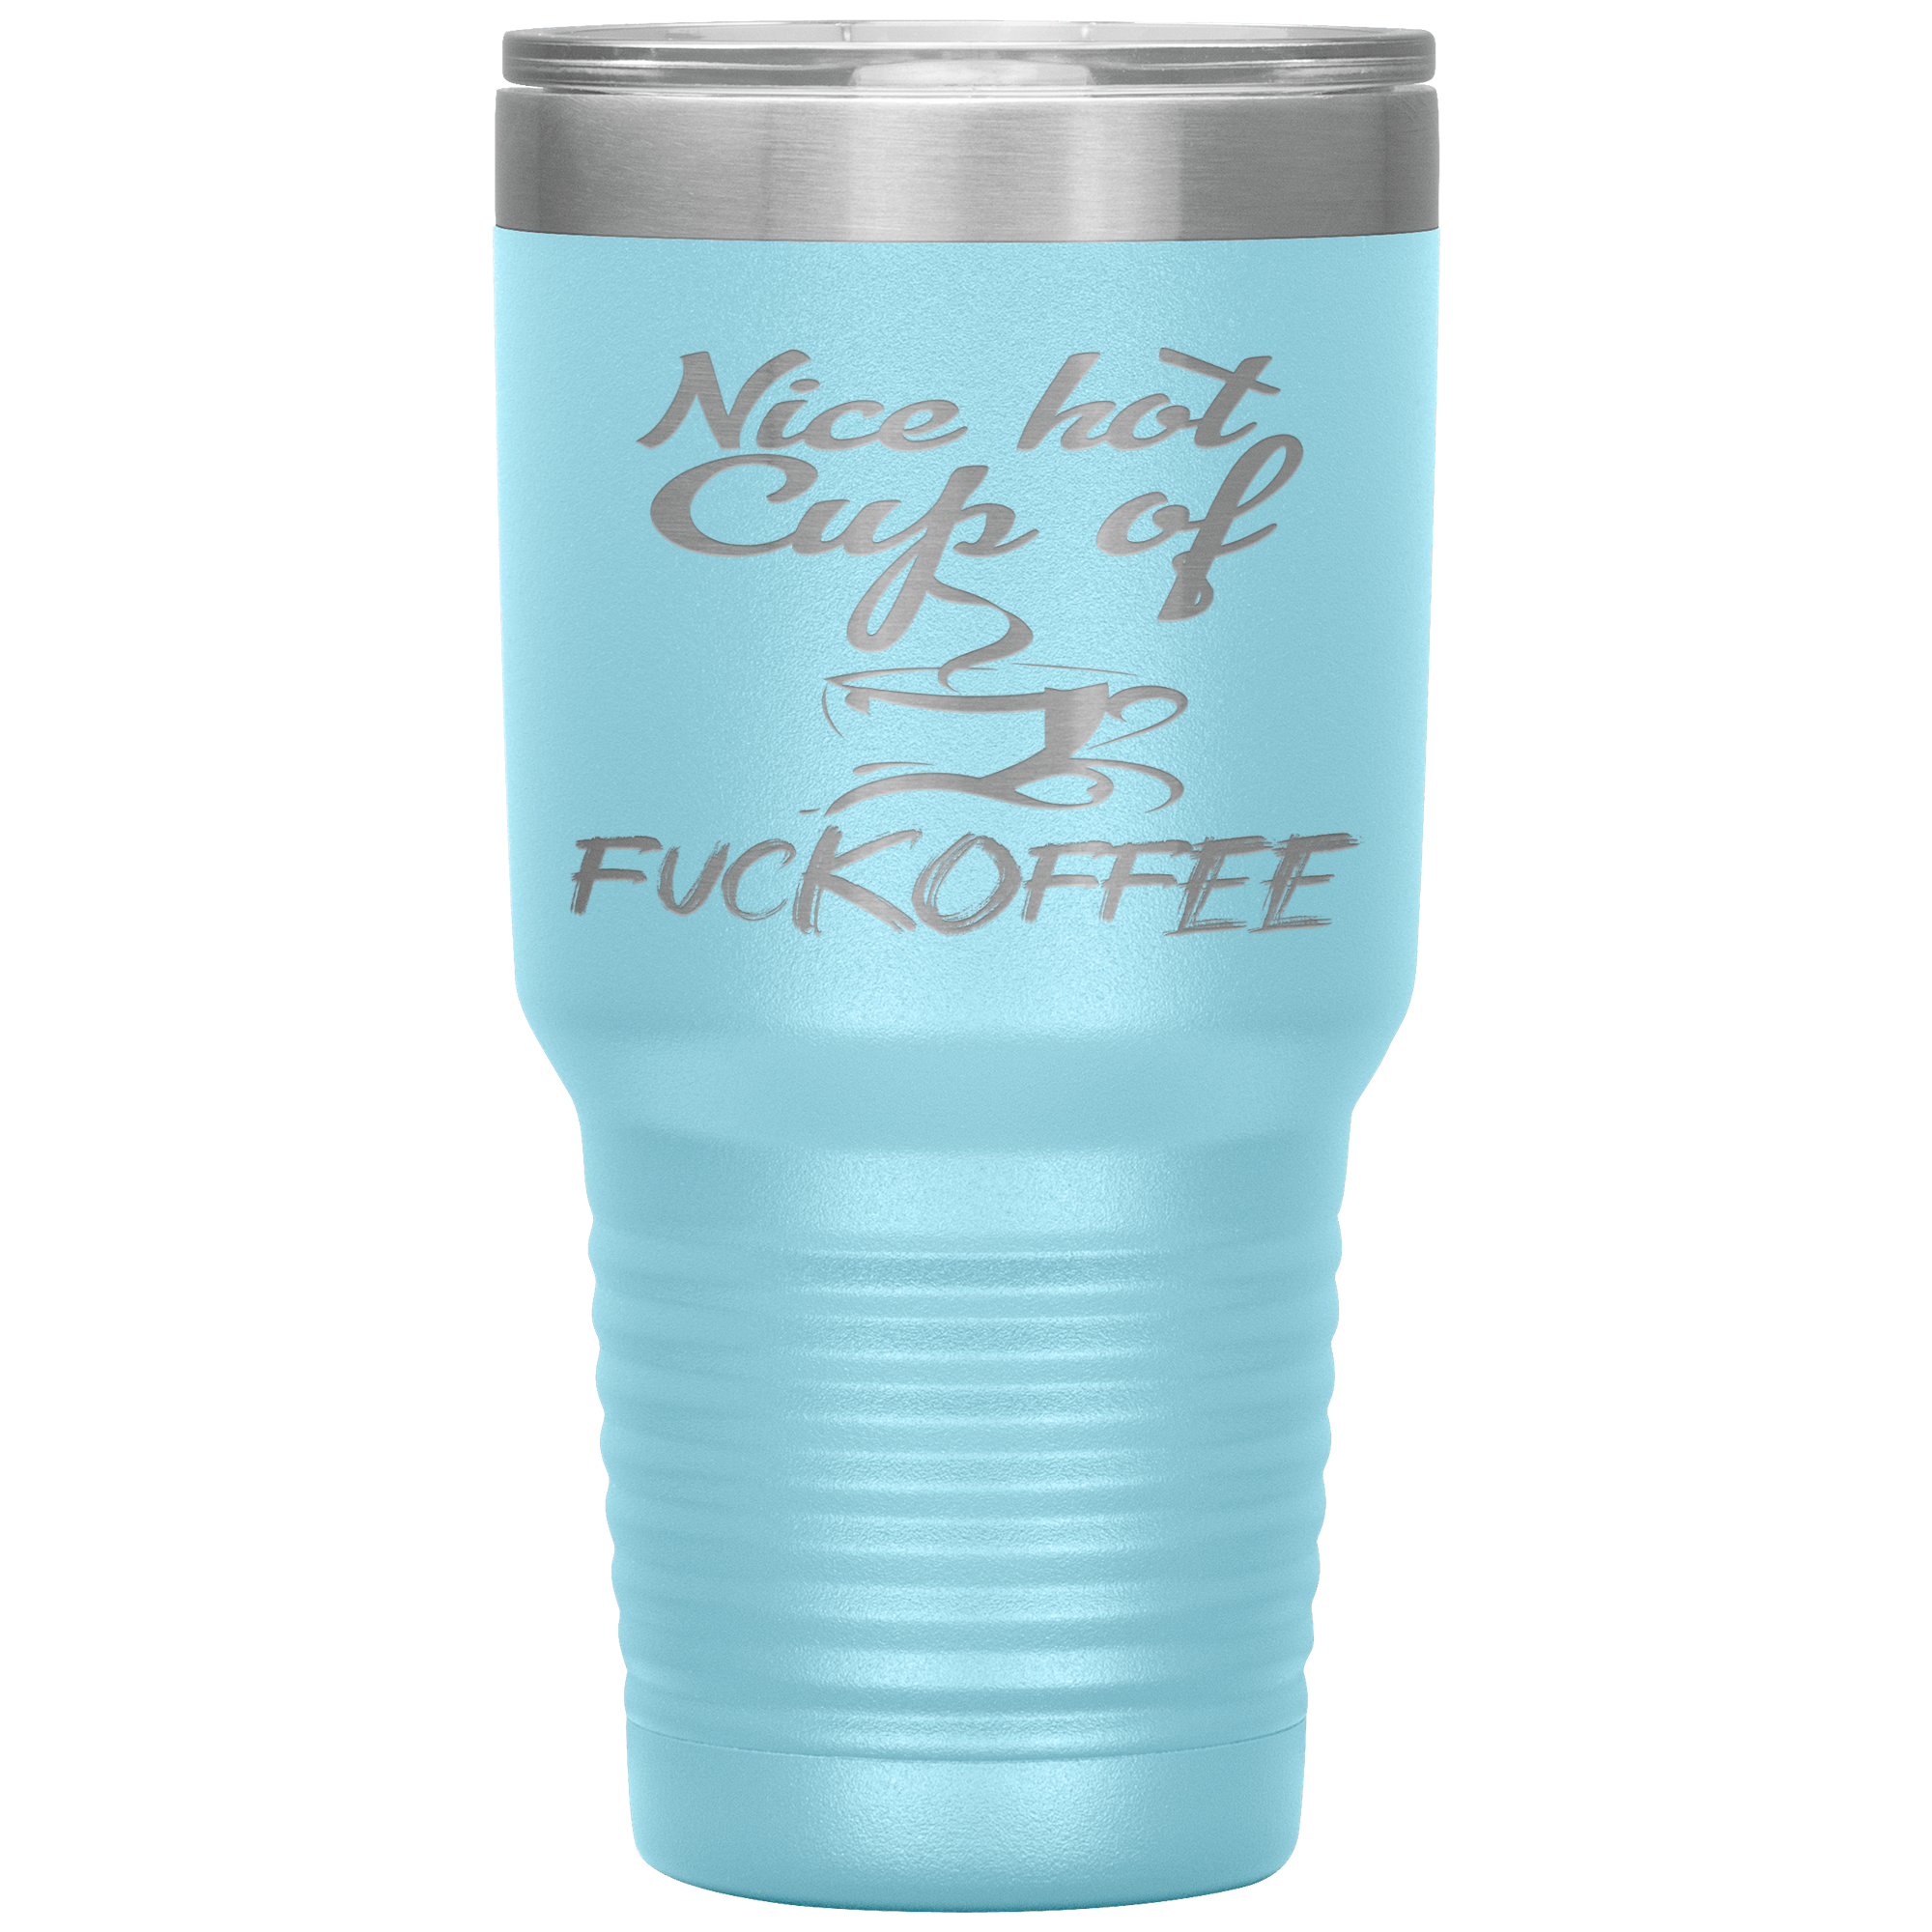 "NICE HOT CUP OF FUCKOFFEE"TUMBLER